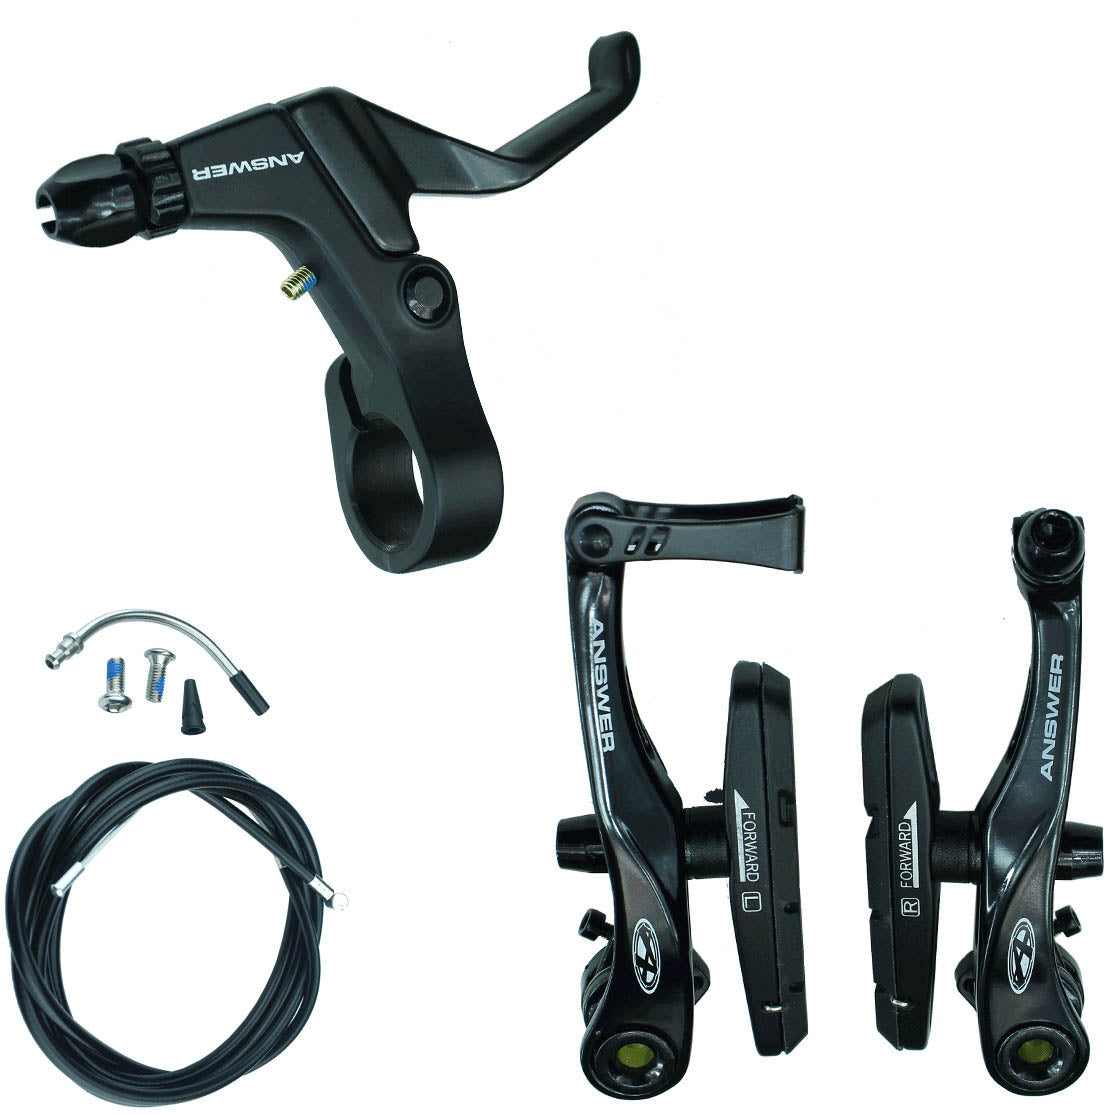 A set of Answer Mini V-Brake Kit bicycle brake components including levers, calipers, threaded brake pads, and cables on a white background.